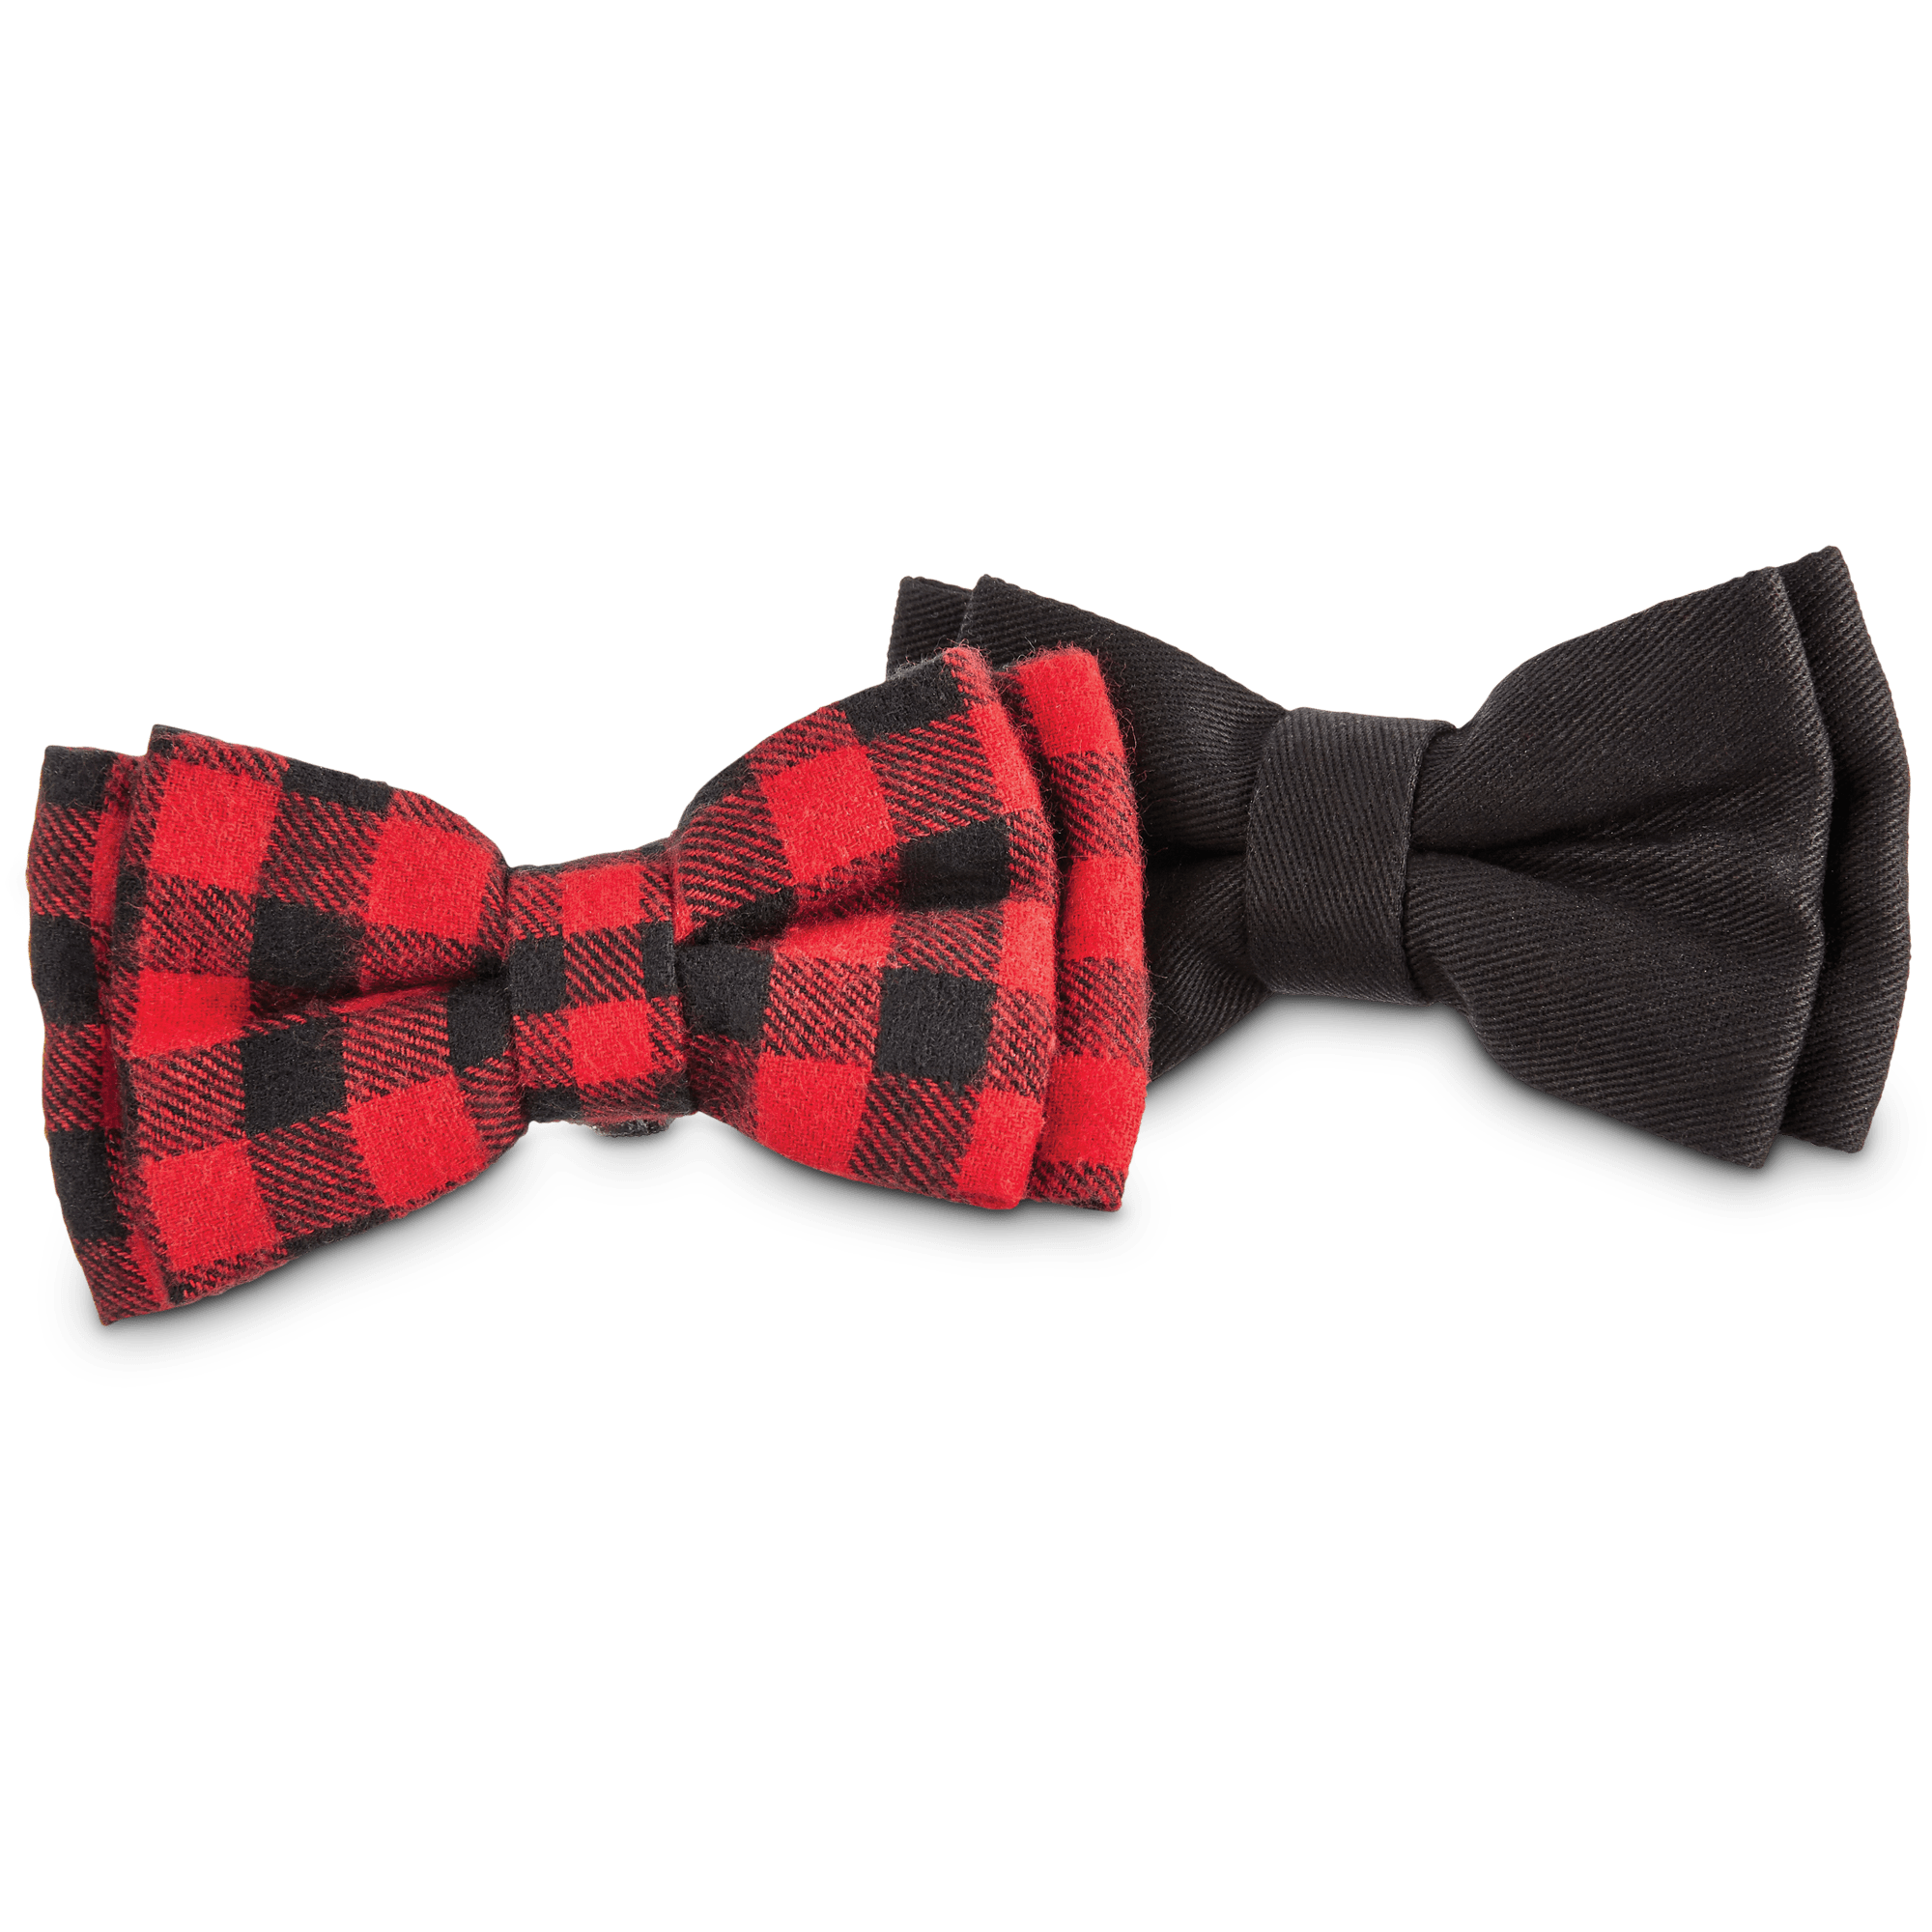 M XL Red And Green Gingham S Adjustable Sizes XS Gingham Dog Collar Bow Tie Set Embroidered With Your Dogs Name L